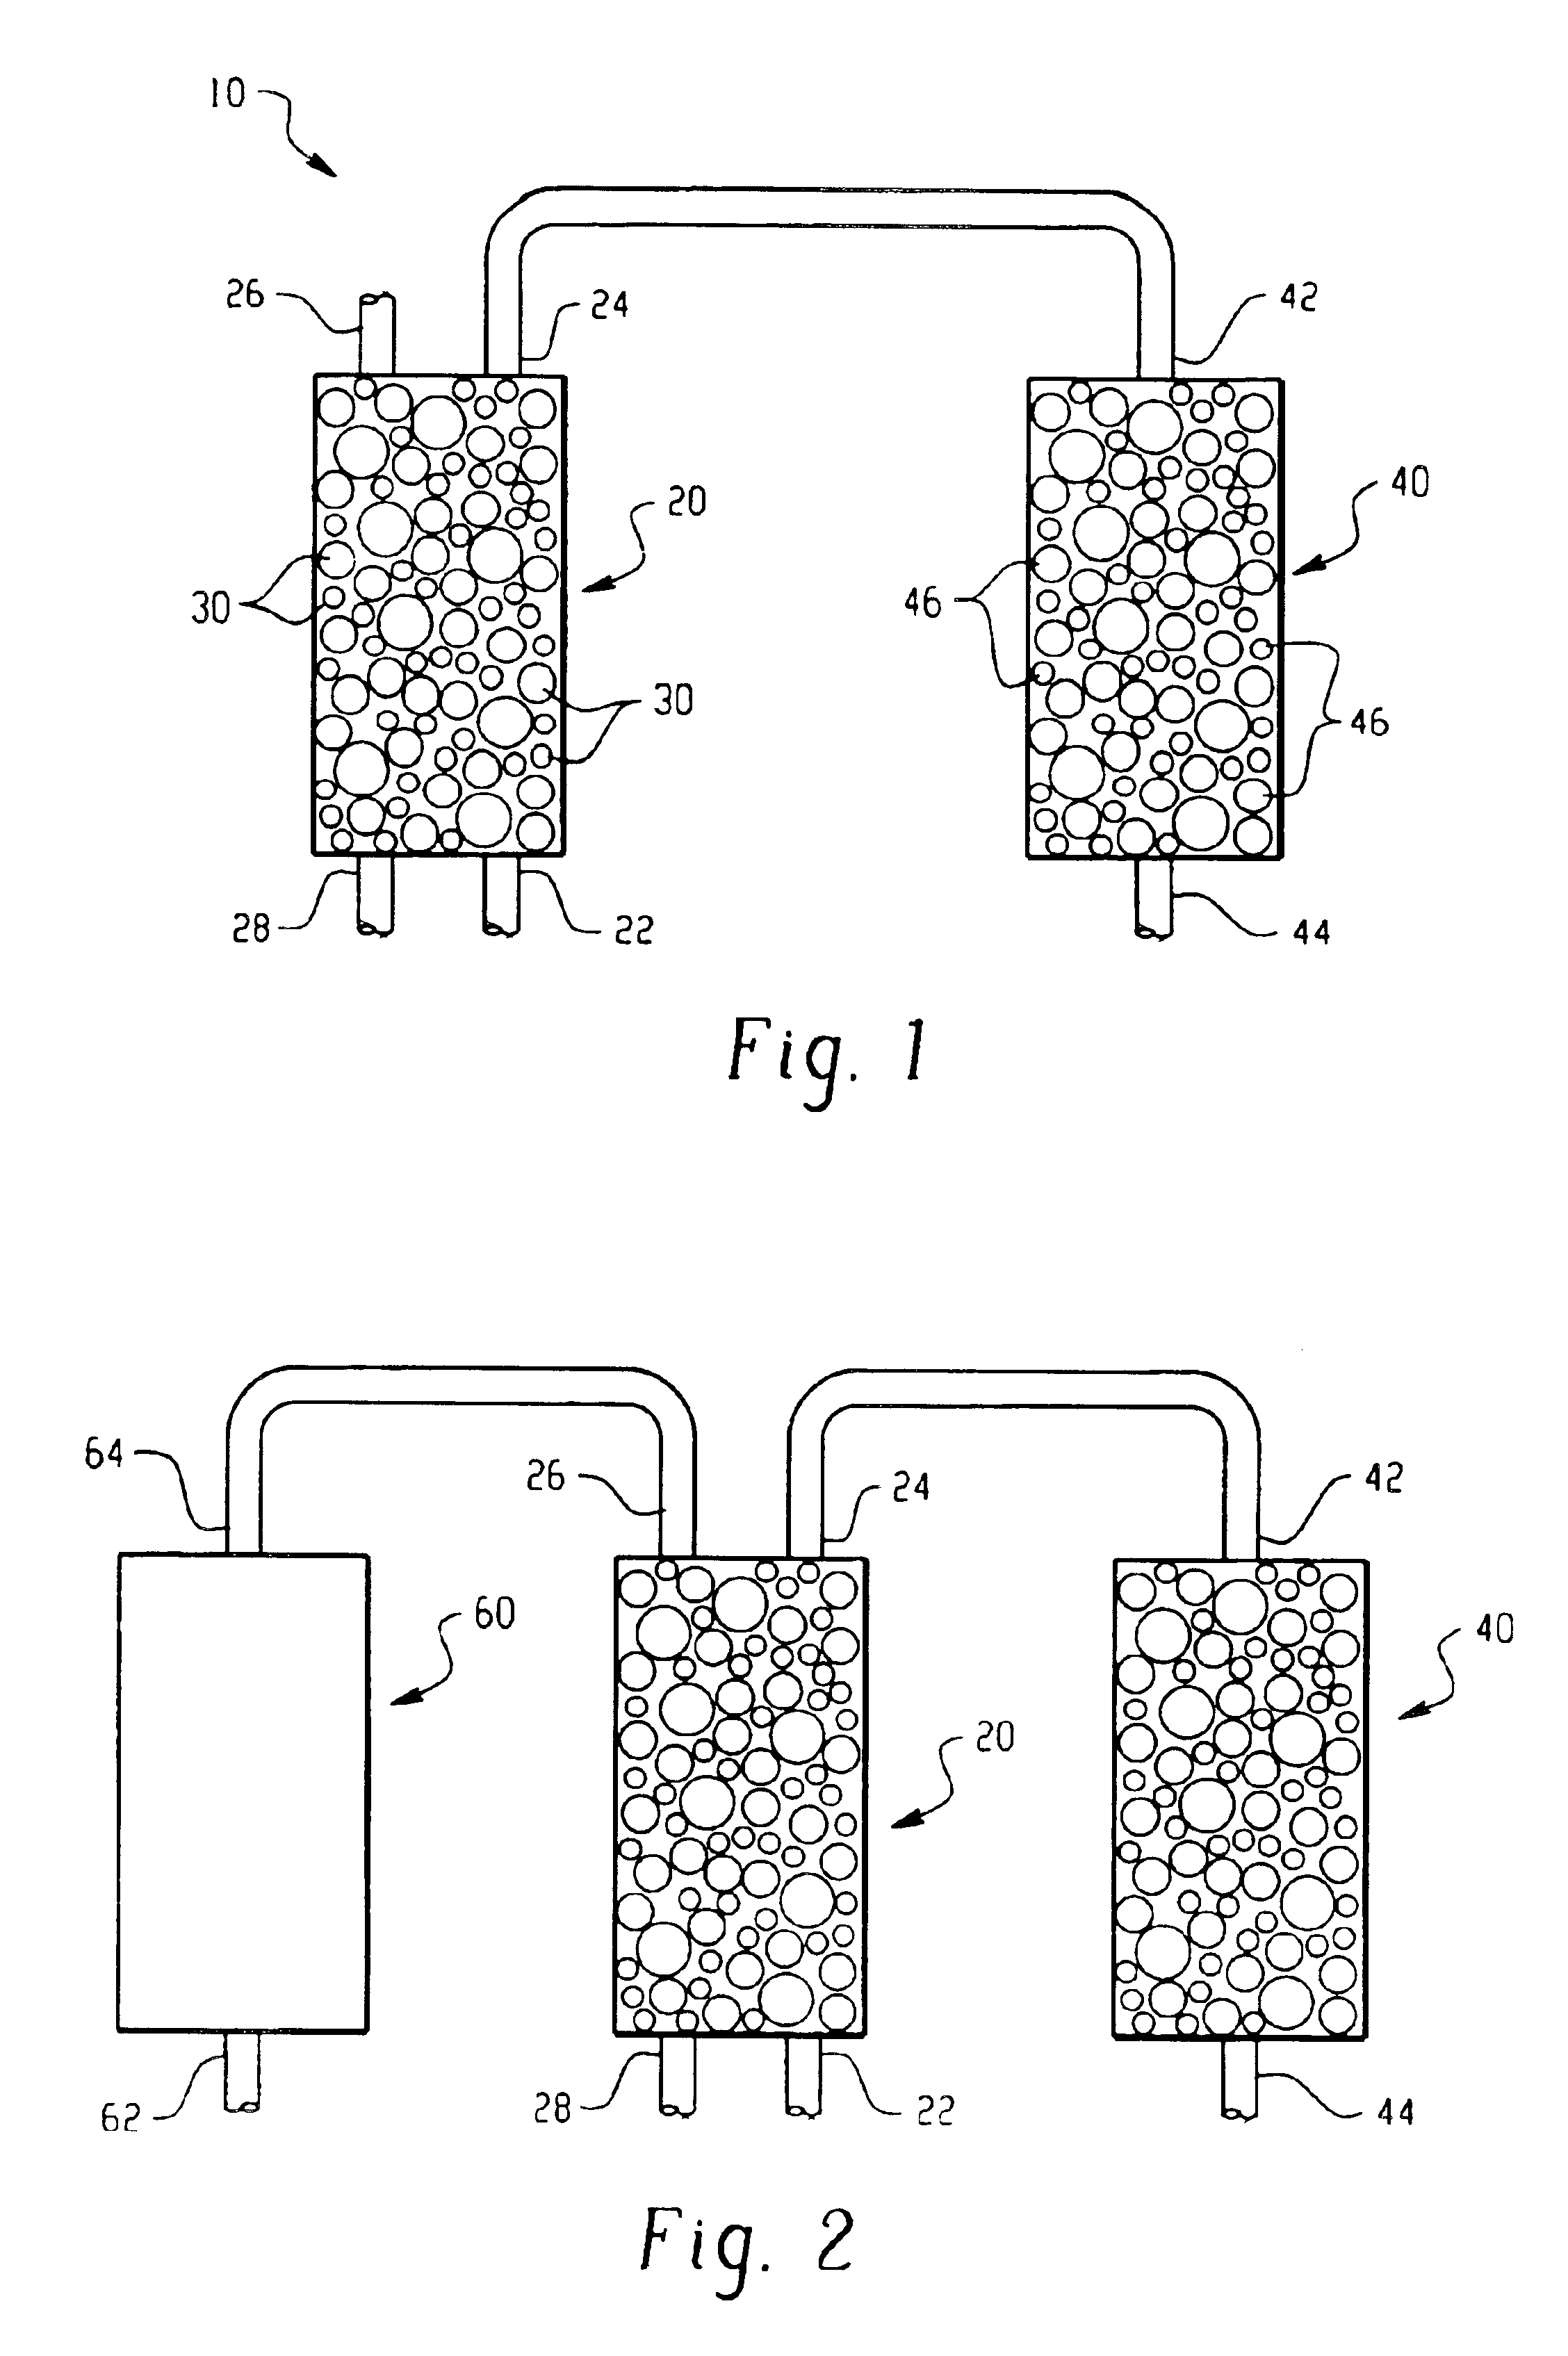 System and process for producing halogen oxides